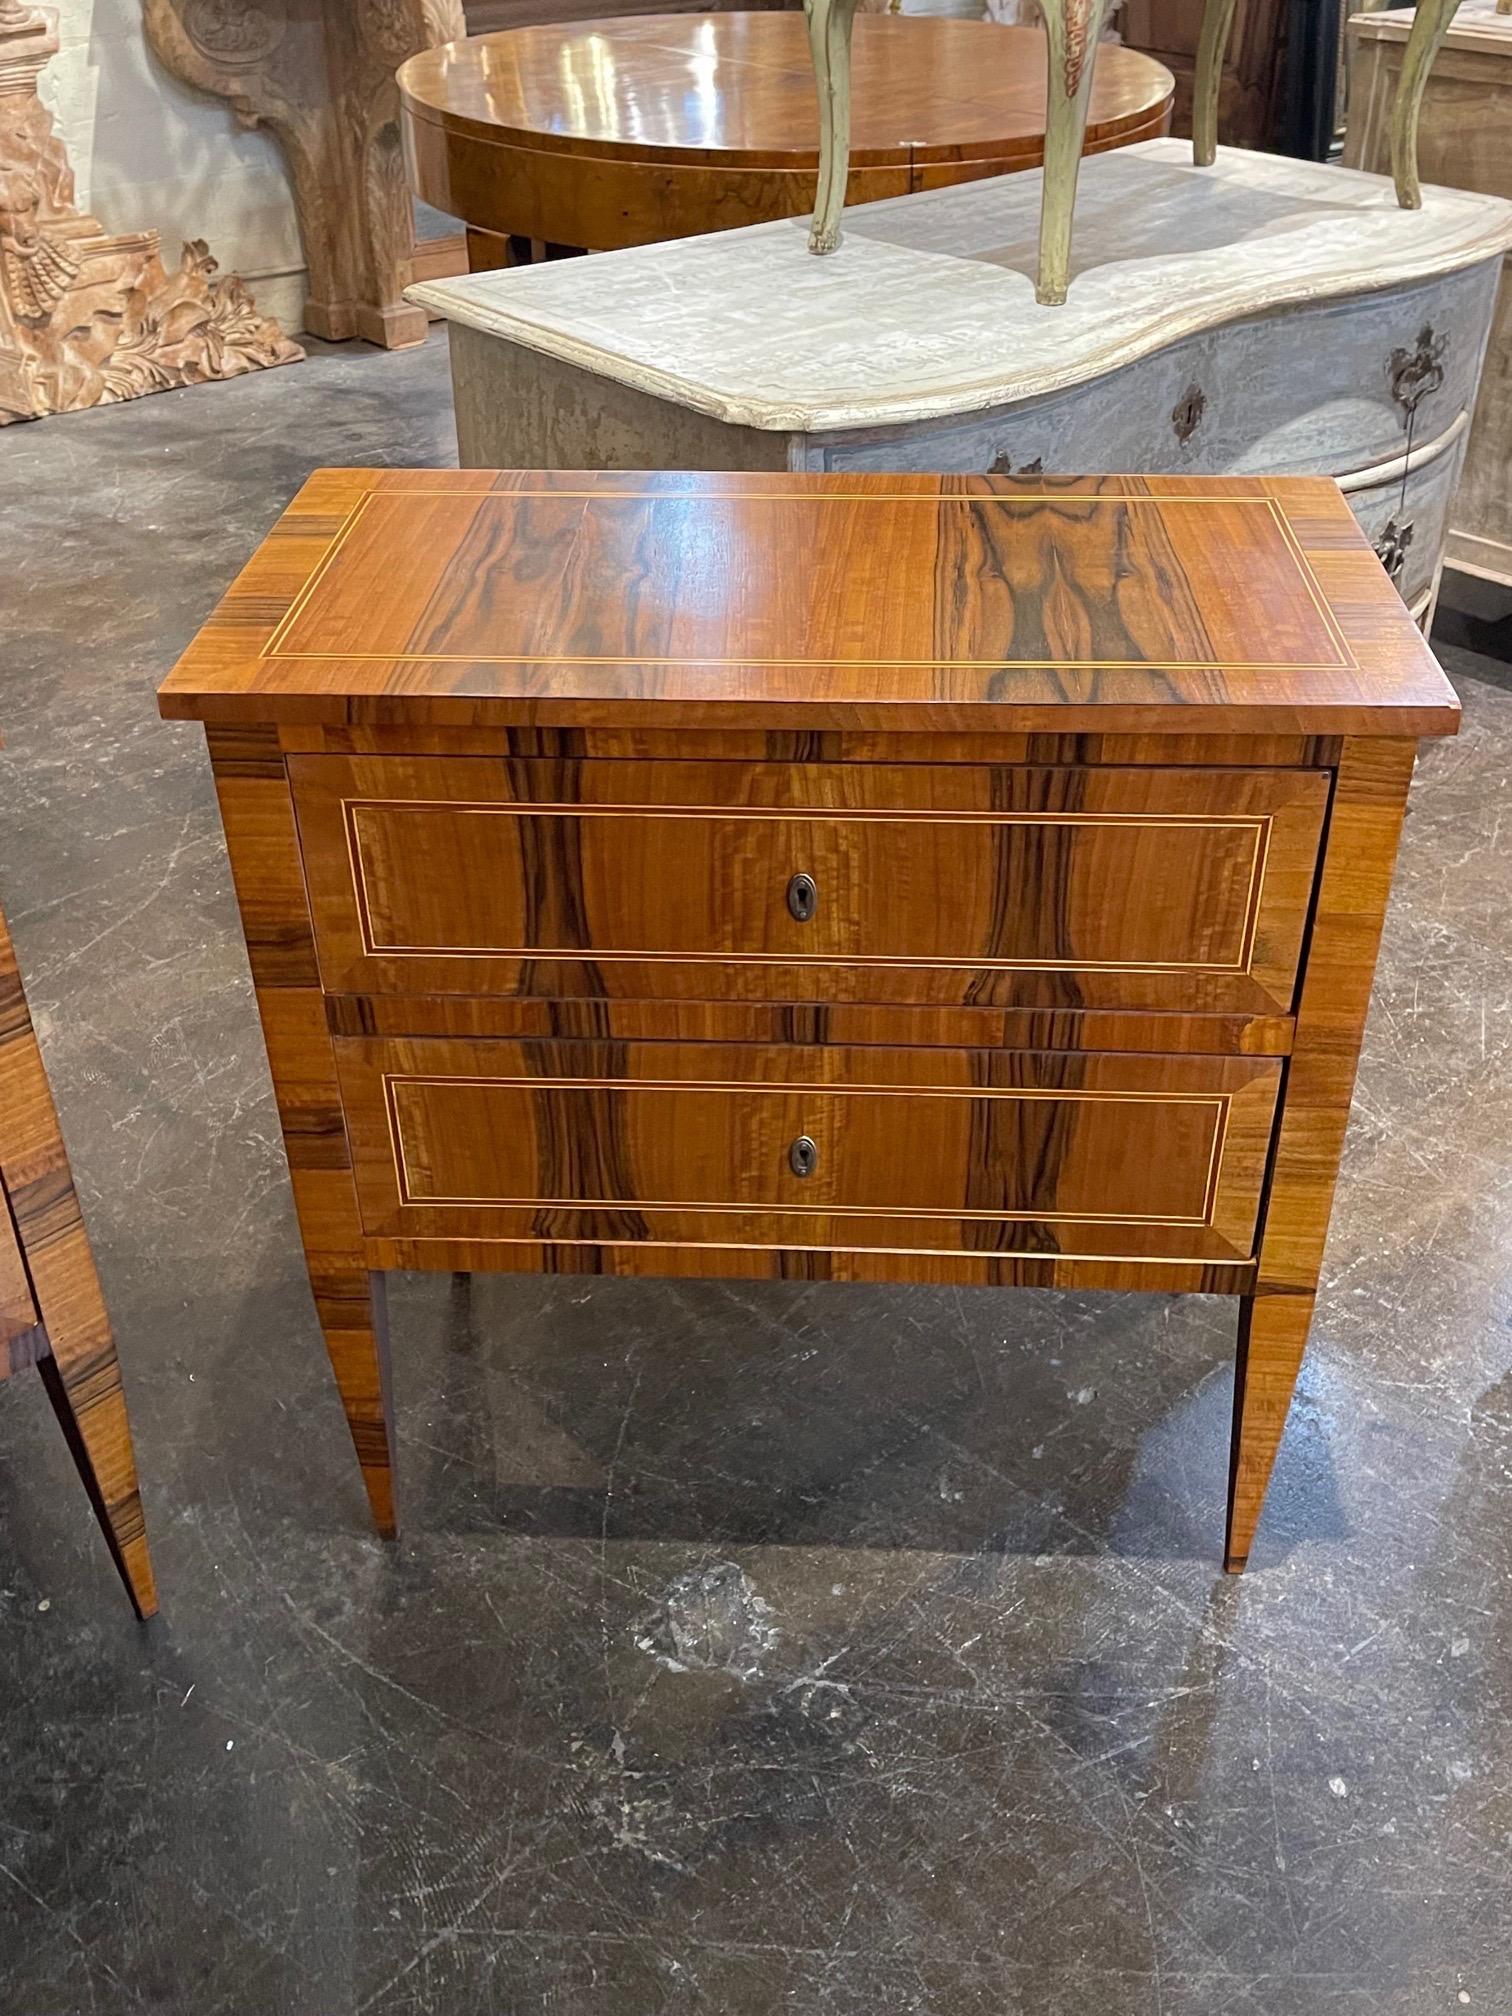 Handsome pair of custom veneer bedside tables from Italy. The set creates a very polished look and has a nice inlaid pattern. Lovely!